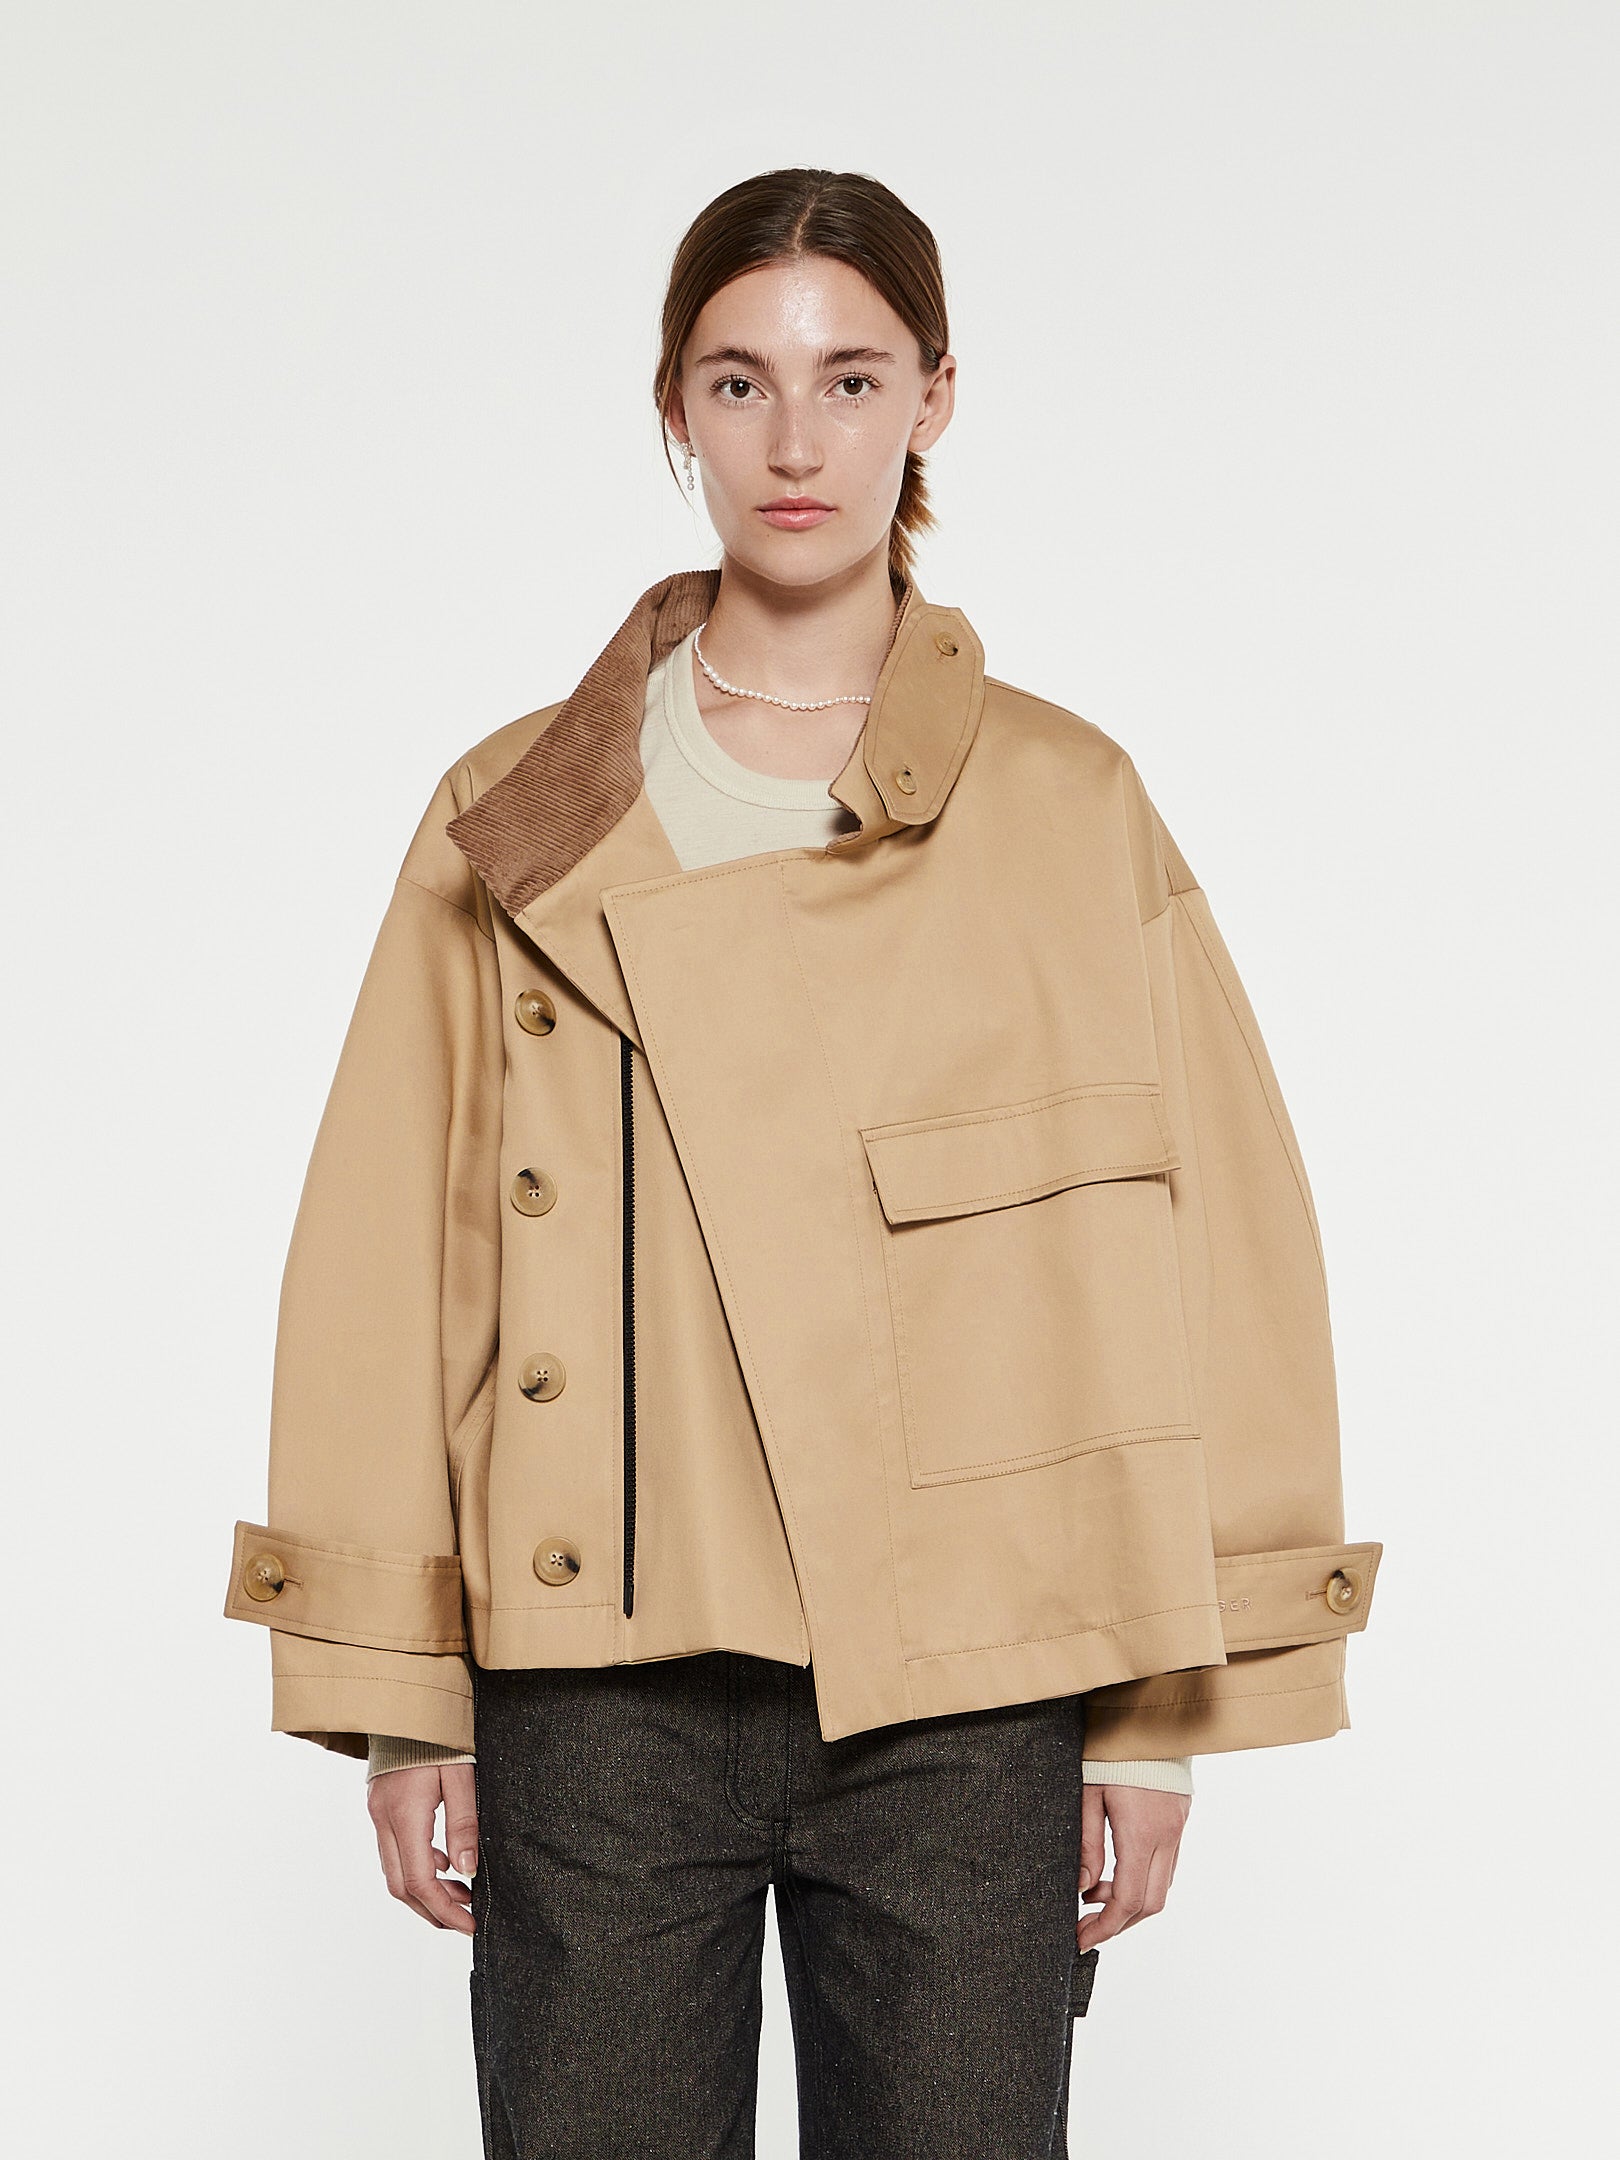 Coats & the stoy at Jackets for women Shop selection 